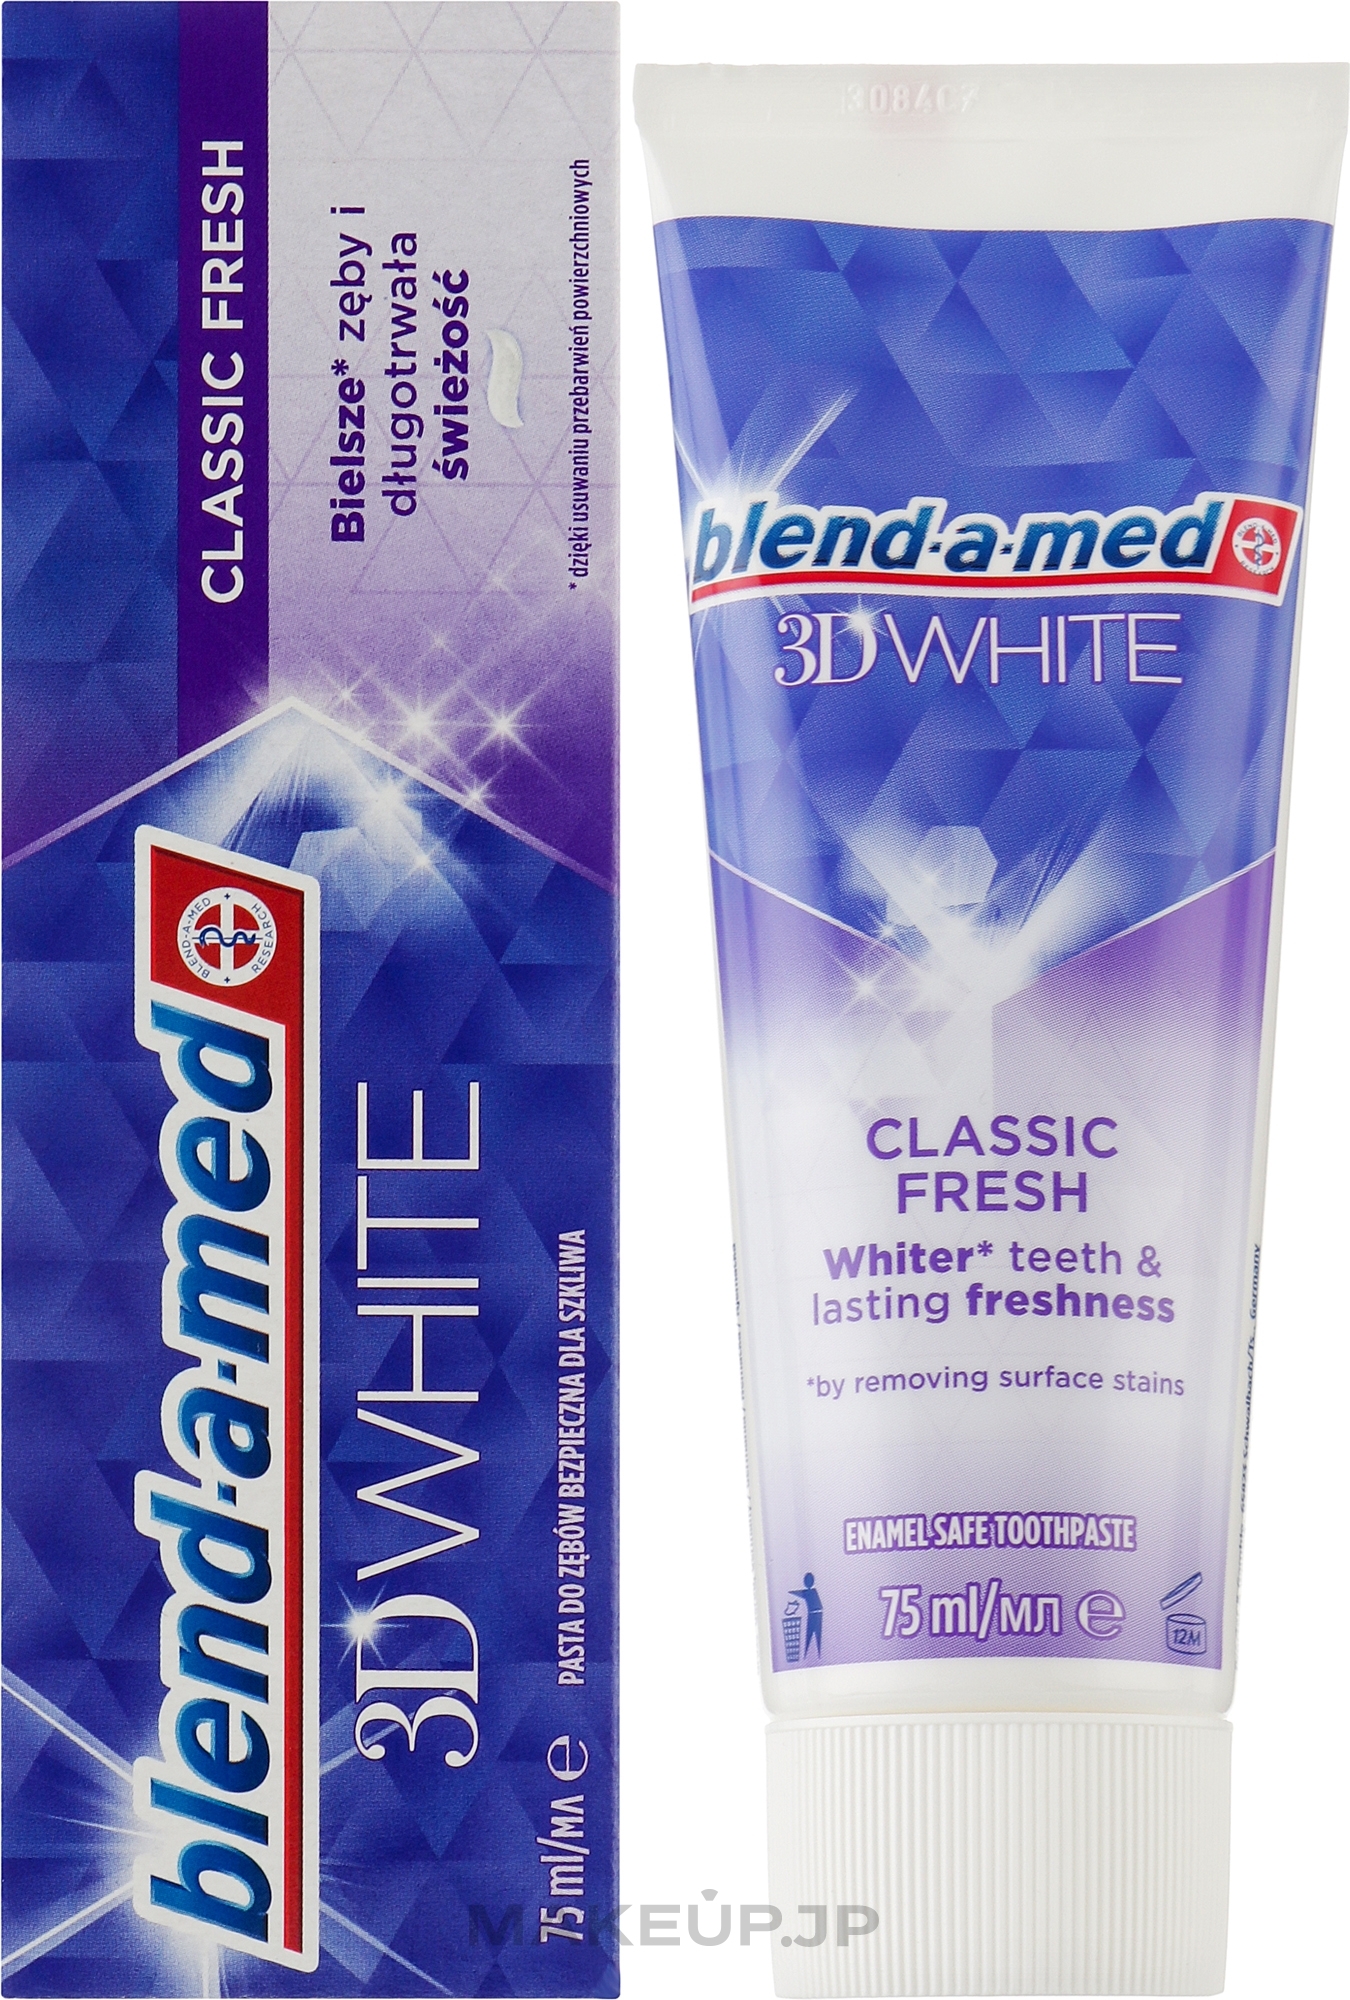 Toothpaste "3D Whitening" - Blend-a-med 3D White Toothpaste — photo 75 ml